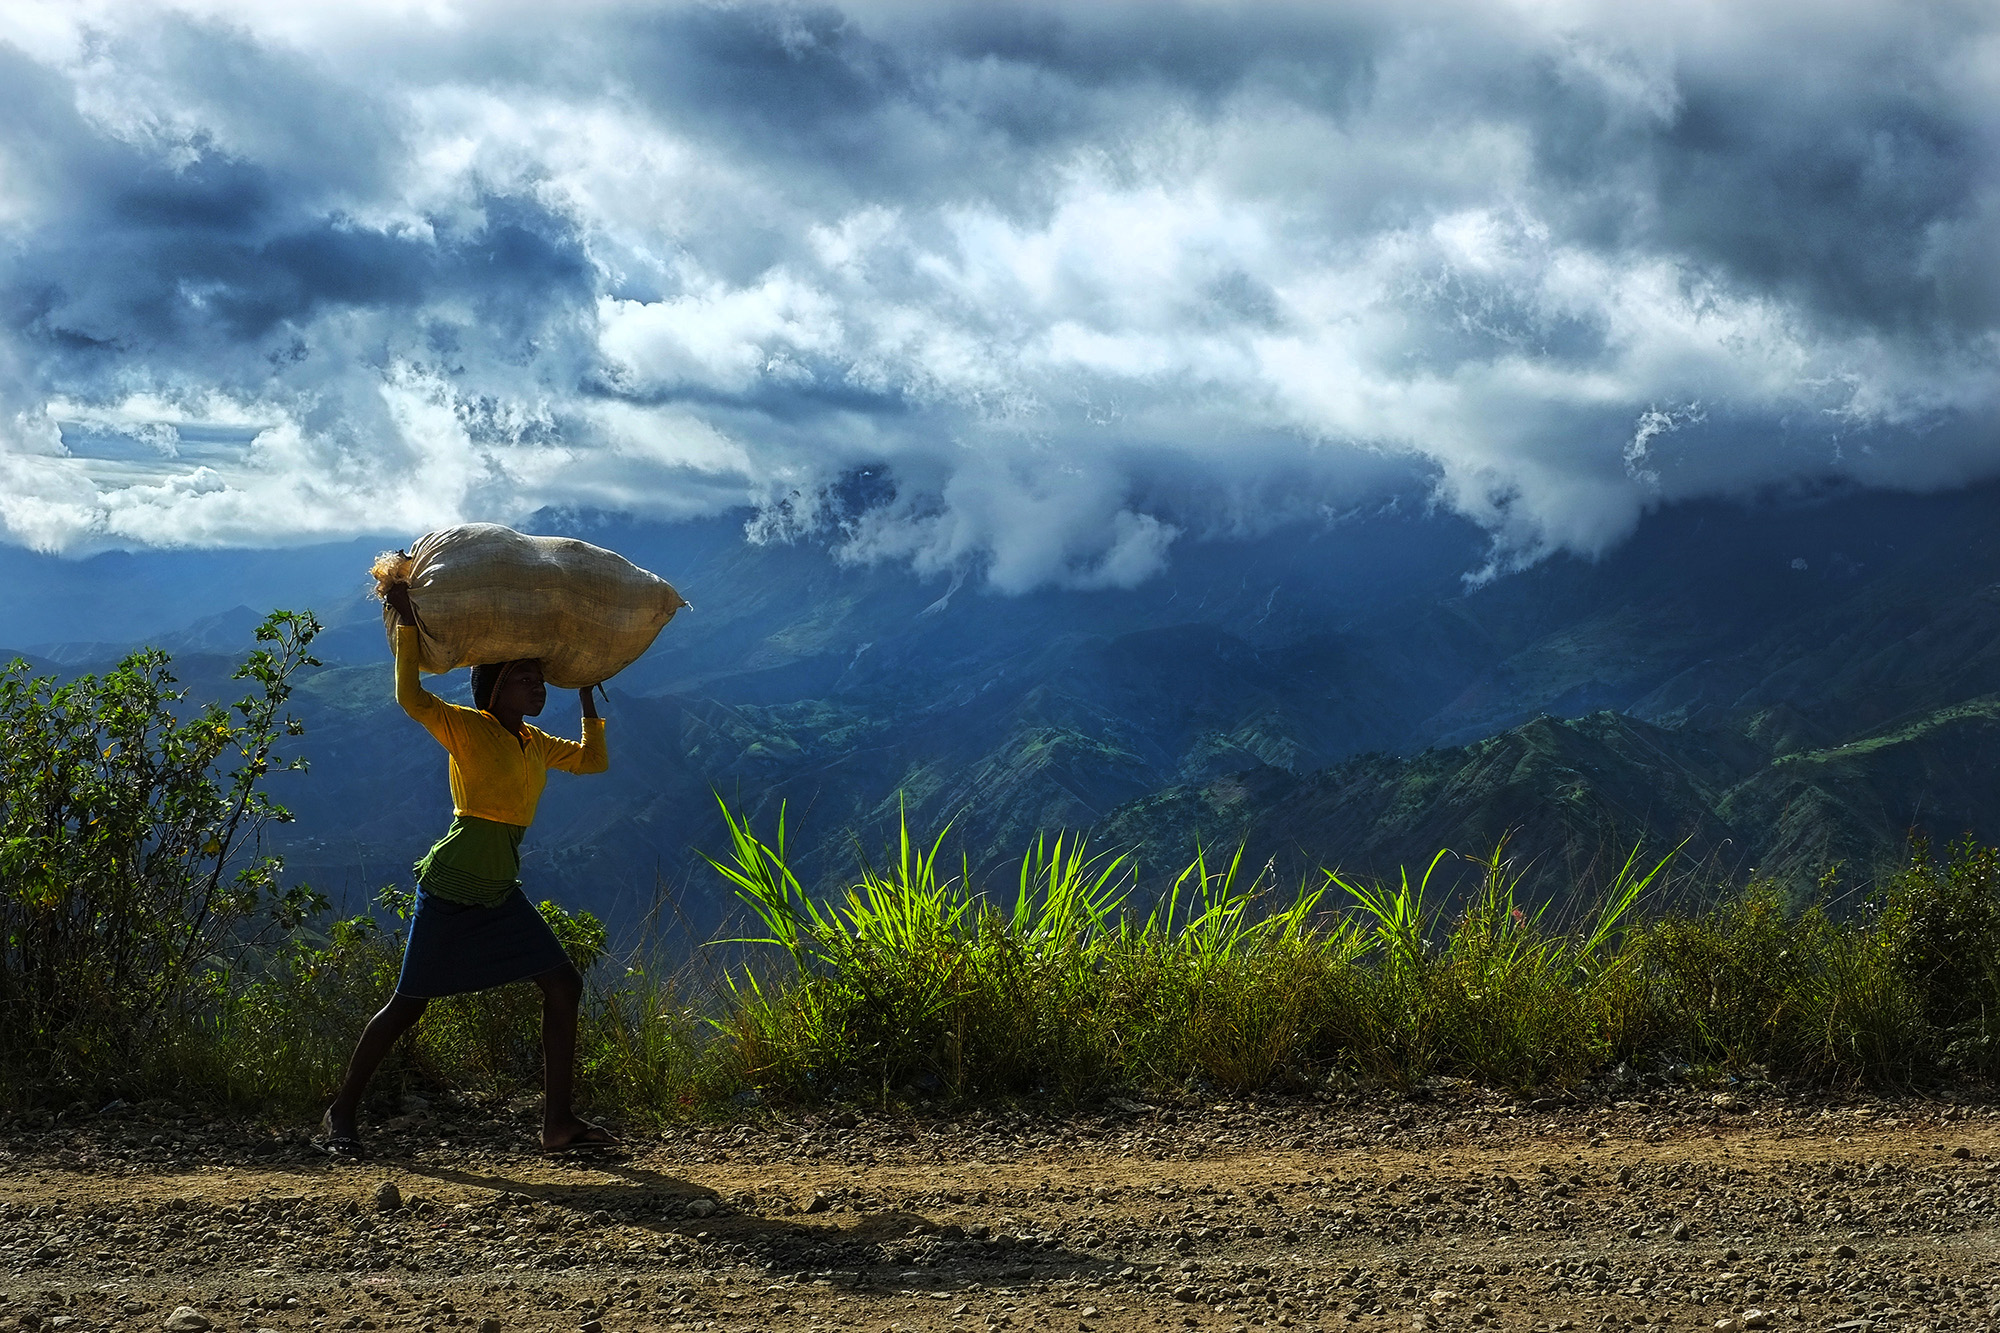 A girl carries a bag of produce to sell in the mountains outside of Port au Prince, Haiti.